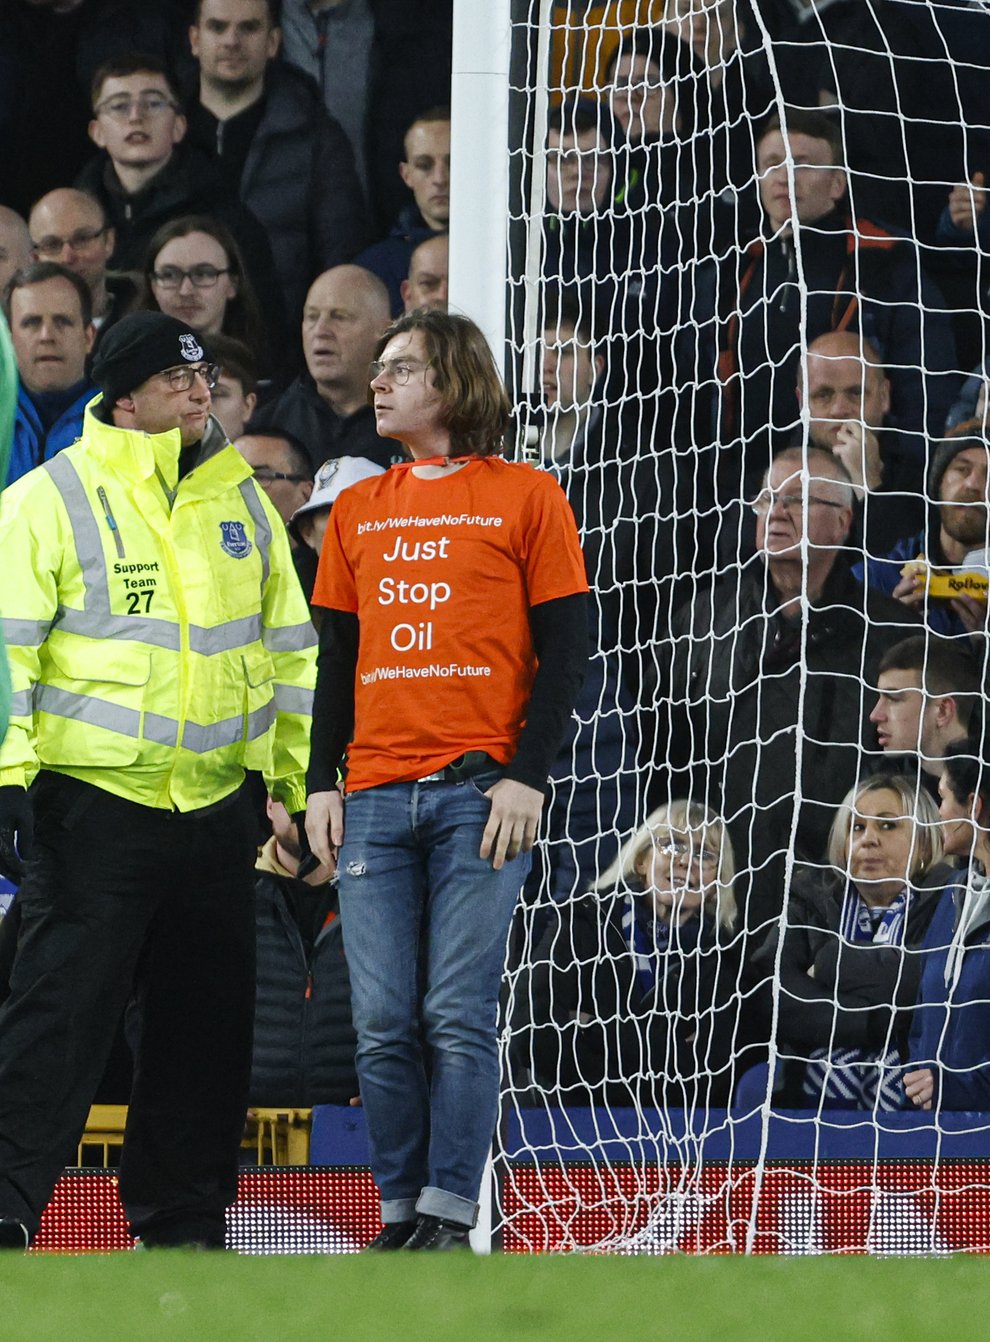 Protester Louis McKechnie tied himself to a goalpost during the Premier League match between Everton and Newcastle Utd at Goodison Park (Richard Sellers/PA)